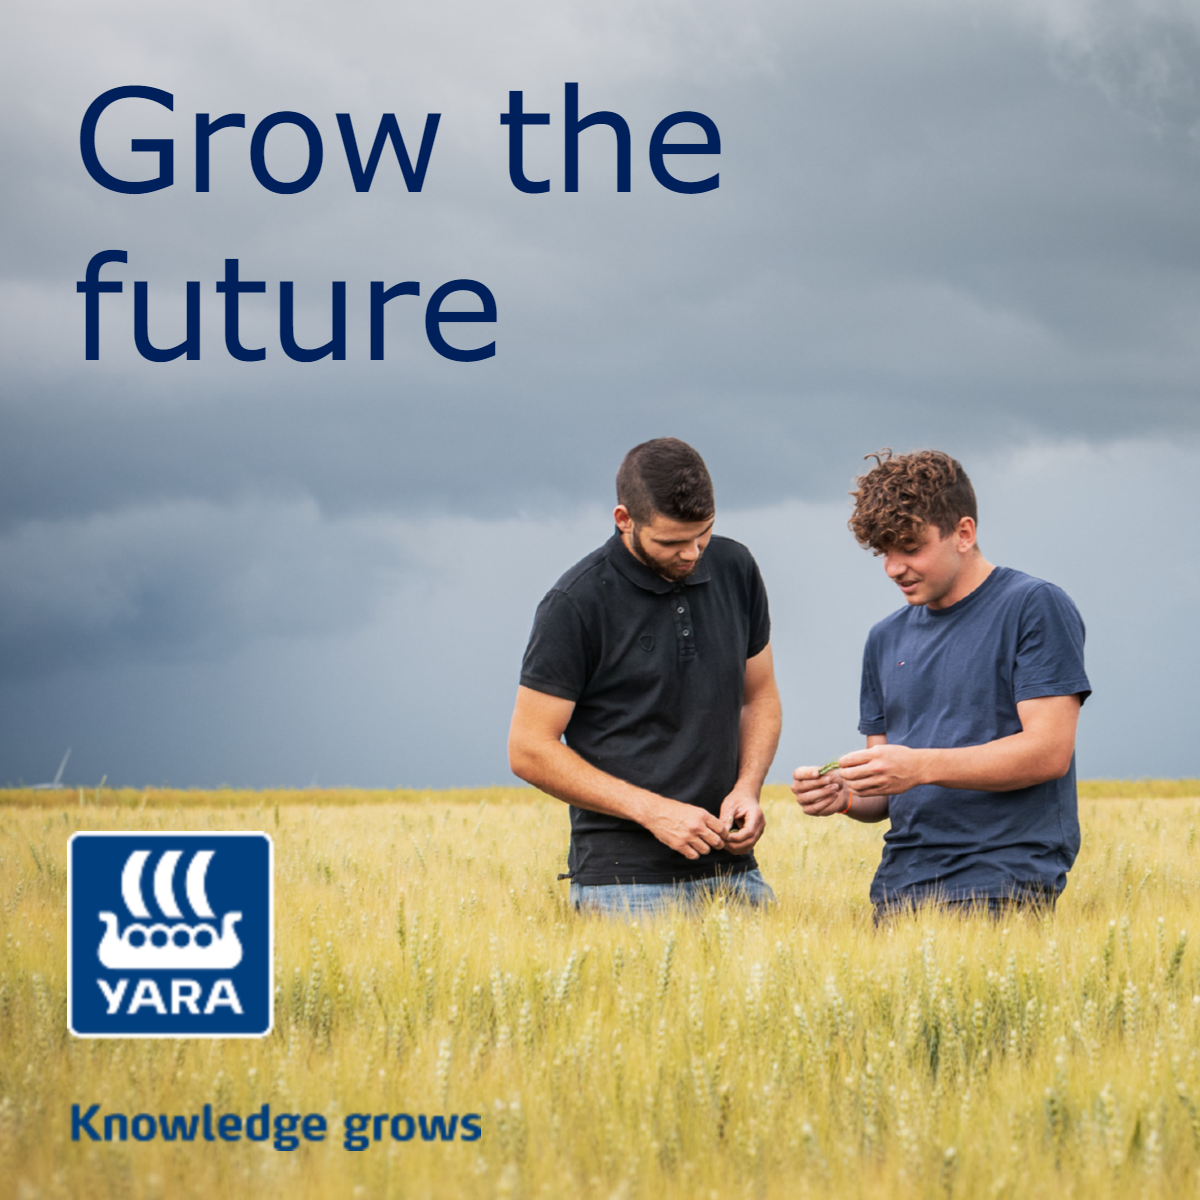 Image of two farmers viewing crops in a field linked to Yara's Grow the Future Podcast